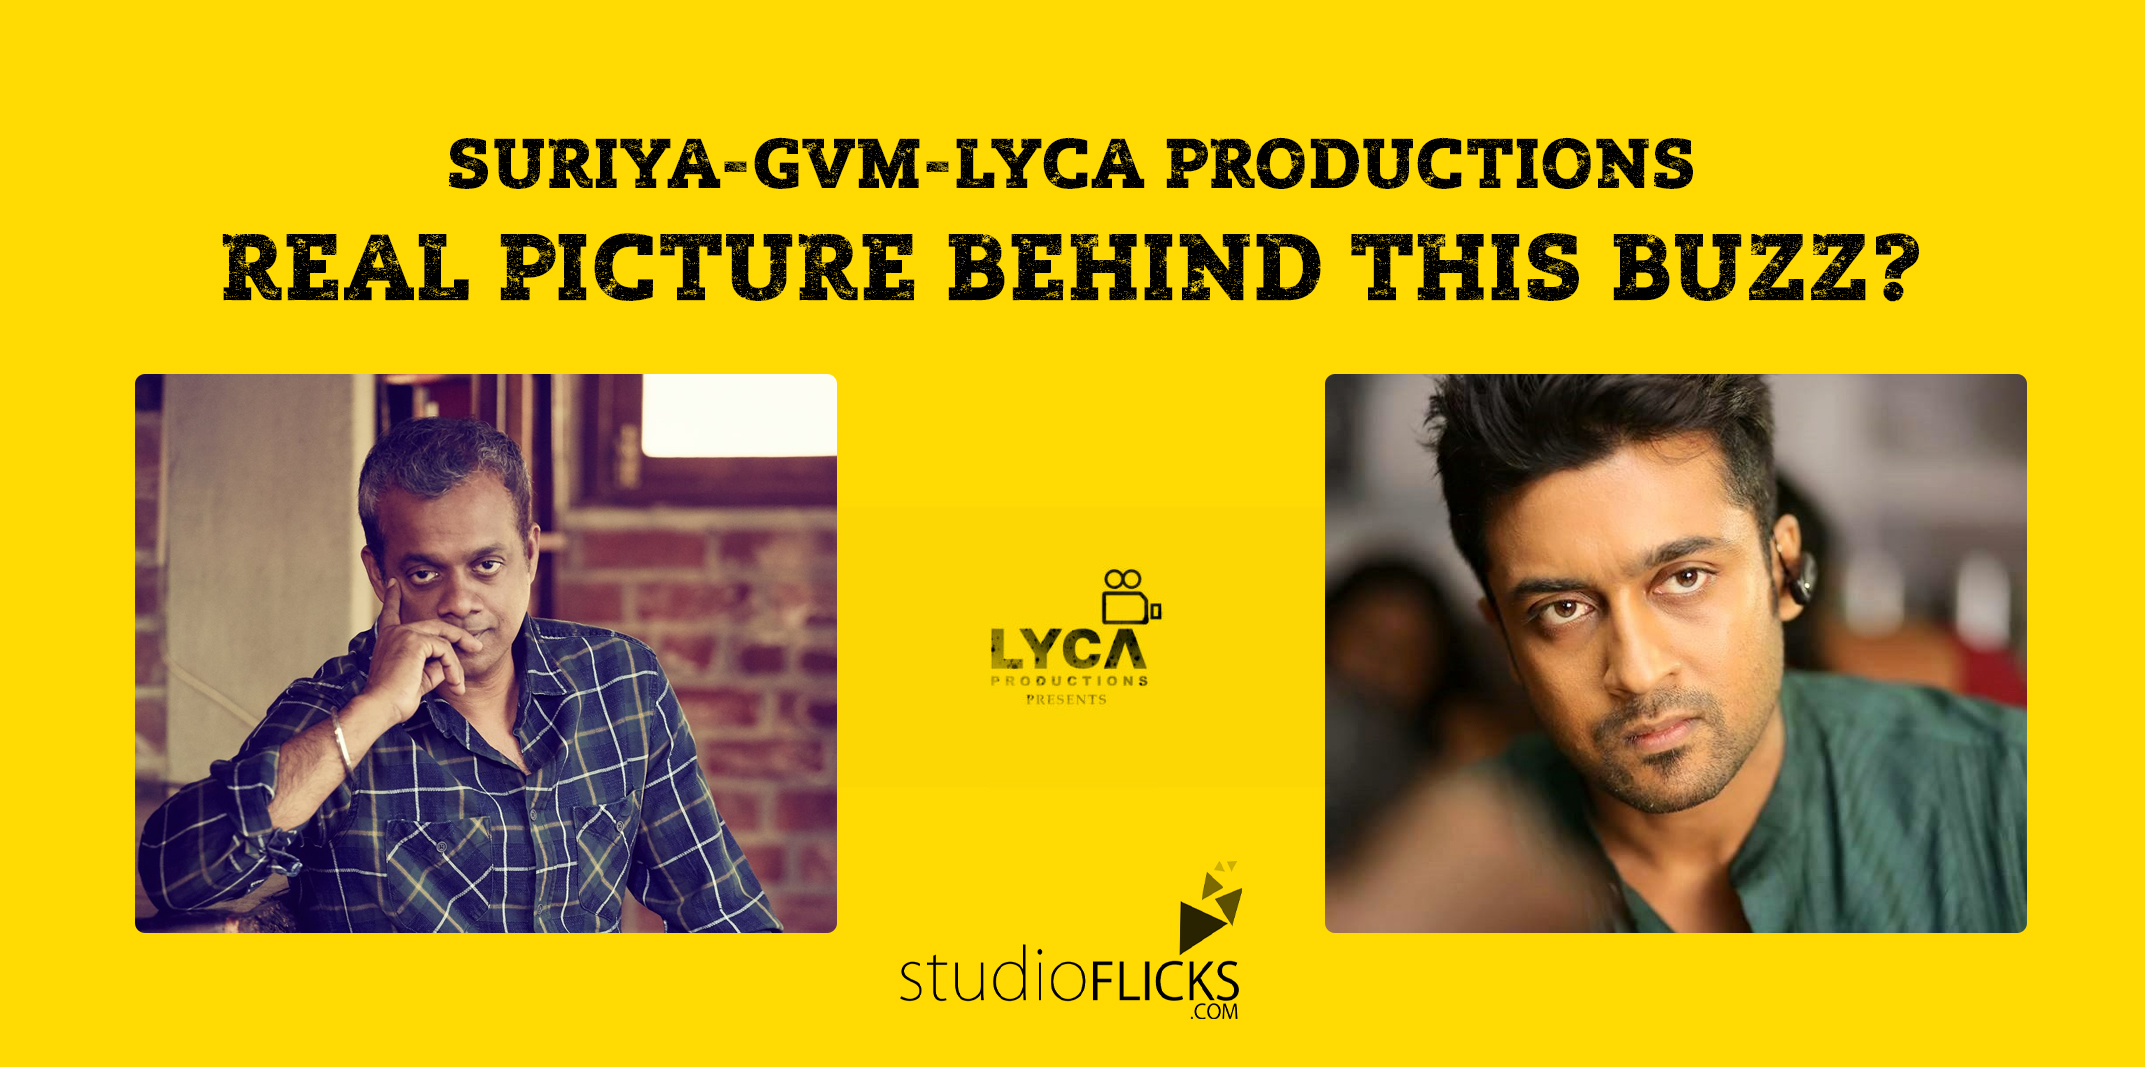 Suriya Gvm Lyca Productions â€“ Real Picture Behind This Buzz